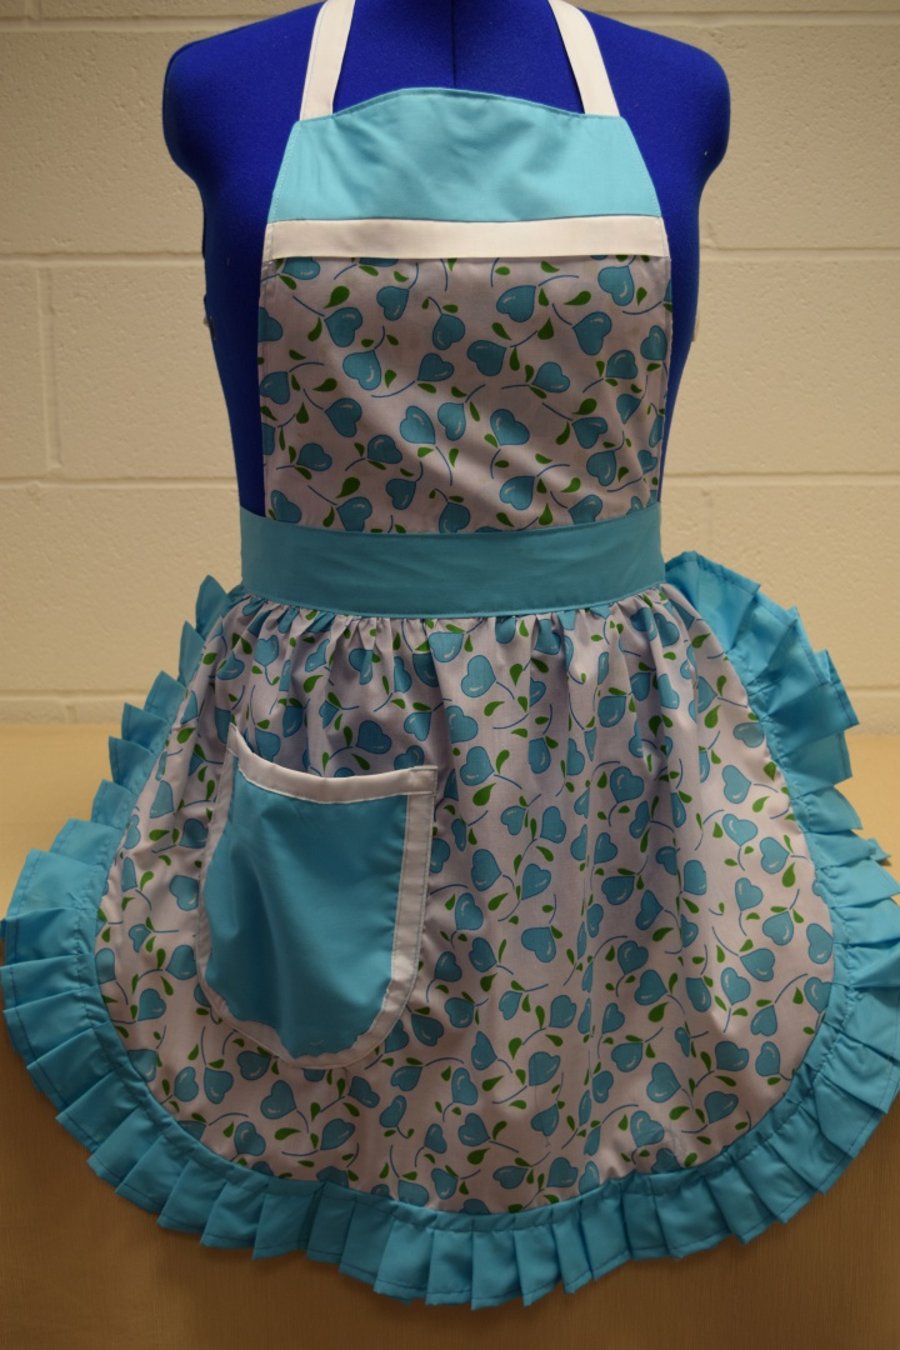 Vintage 50s Style Full Apron Pinny - Turquoise & White Hearts